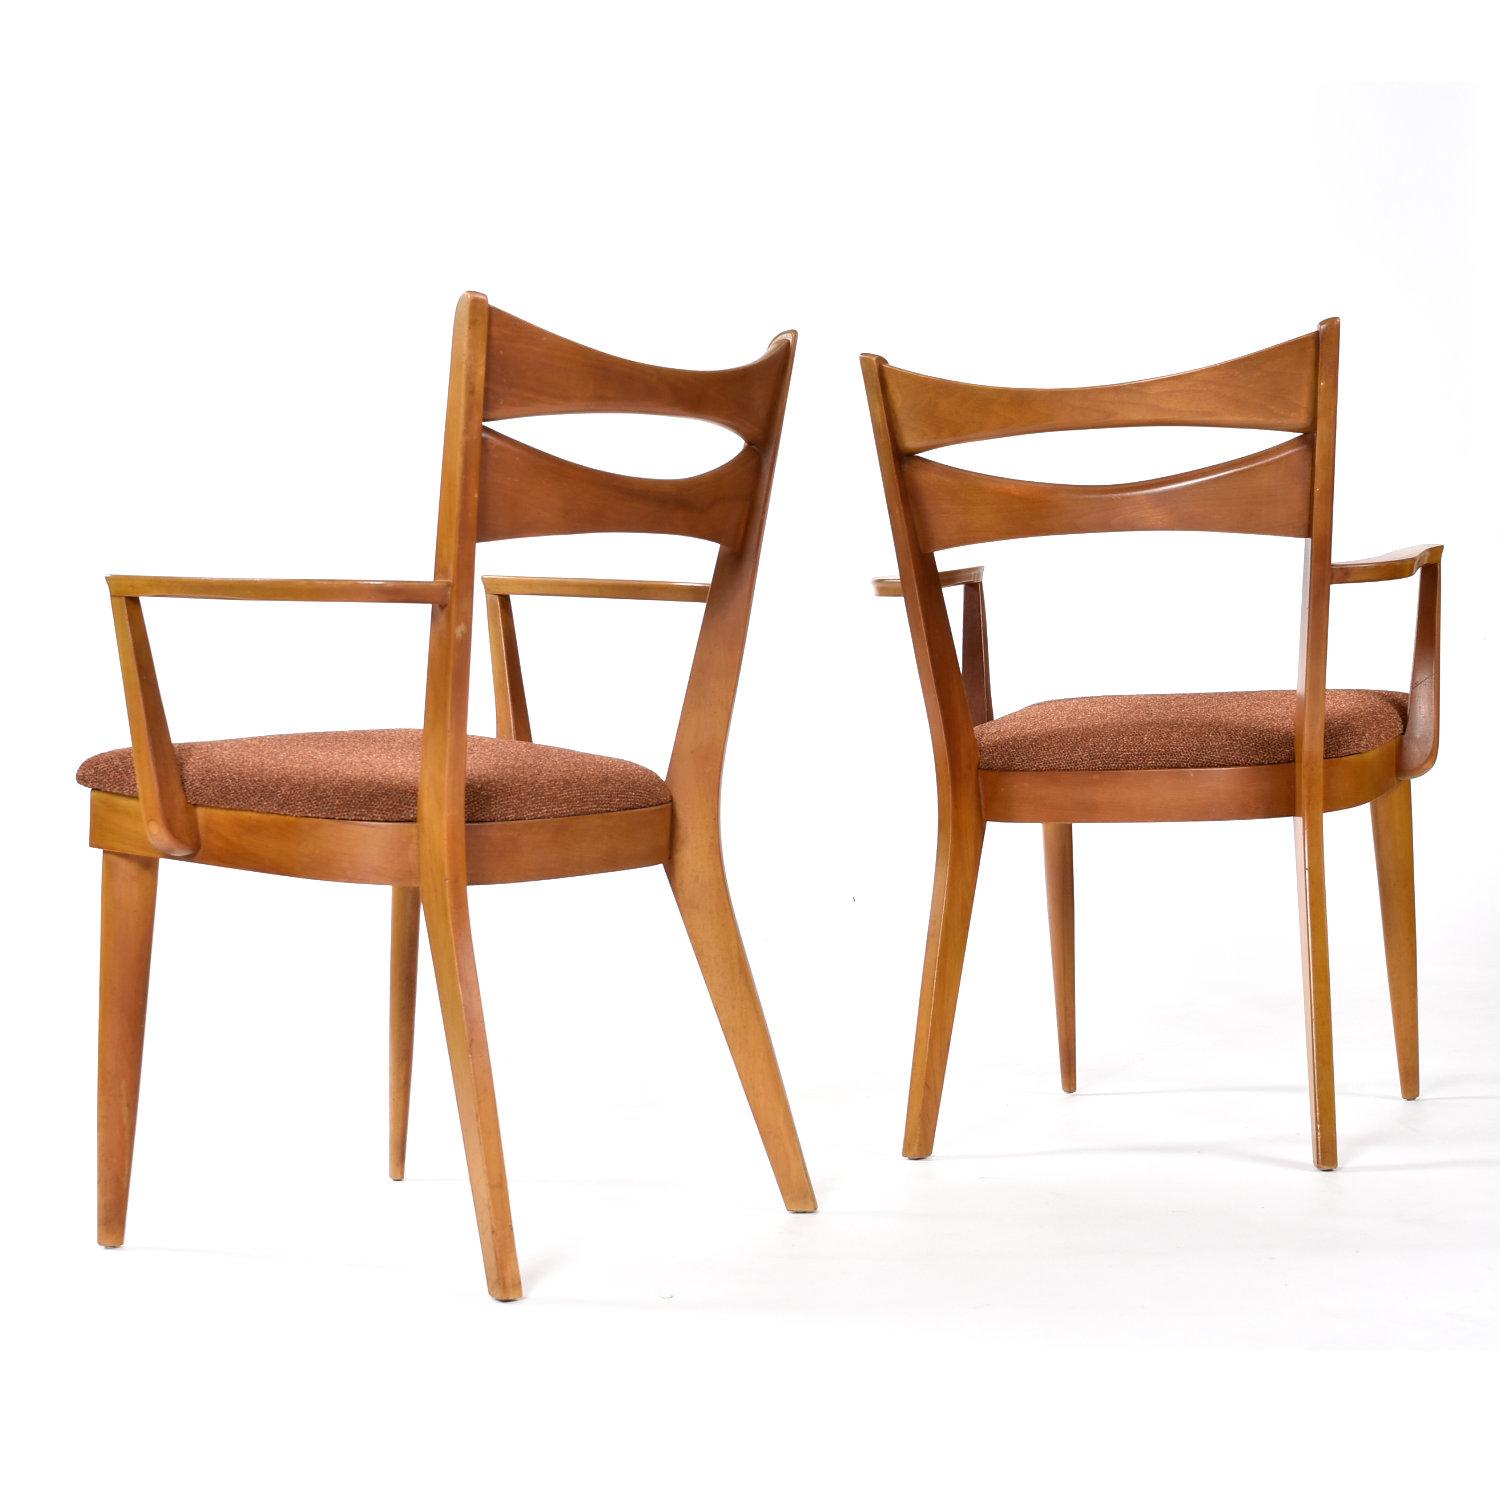 Heywood Wakefield Dining Table Set with '6' M1553 Cat’s Eye Dining Chairs 2